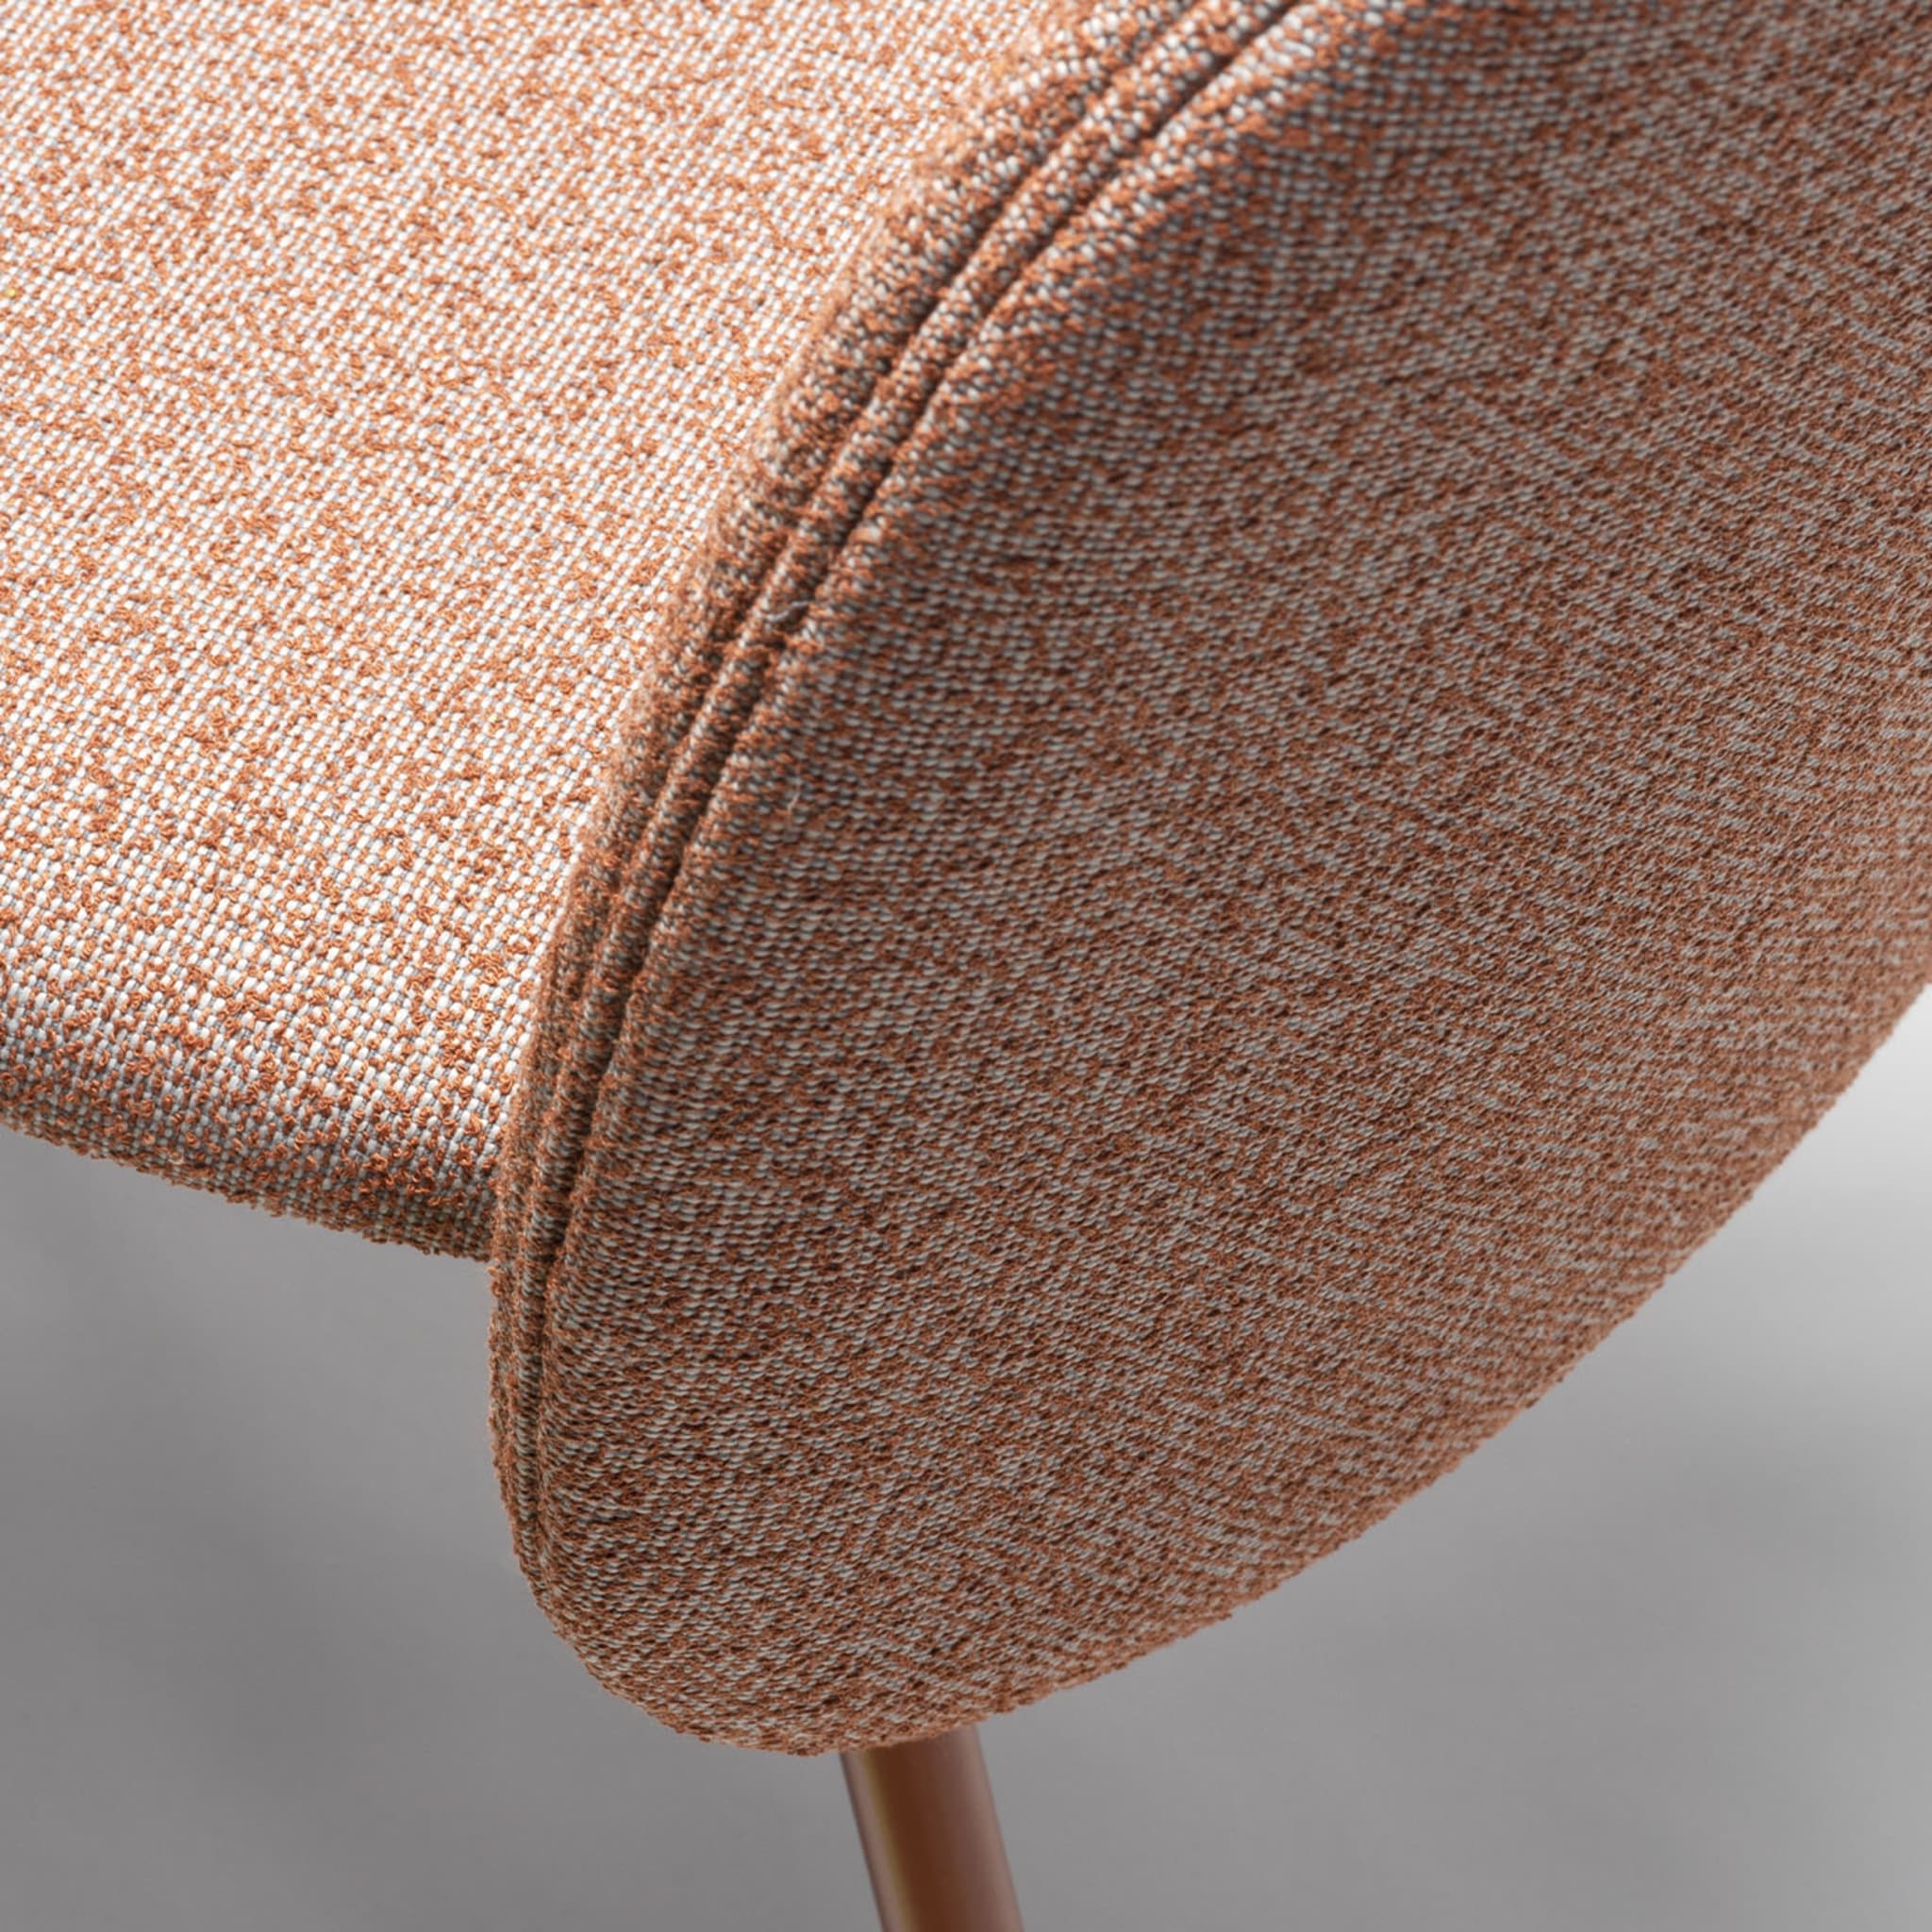 Chips M Terracotta Chair By Studio Pastina - Alternative view 2